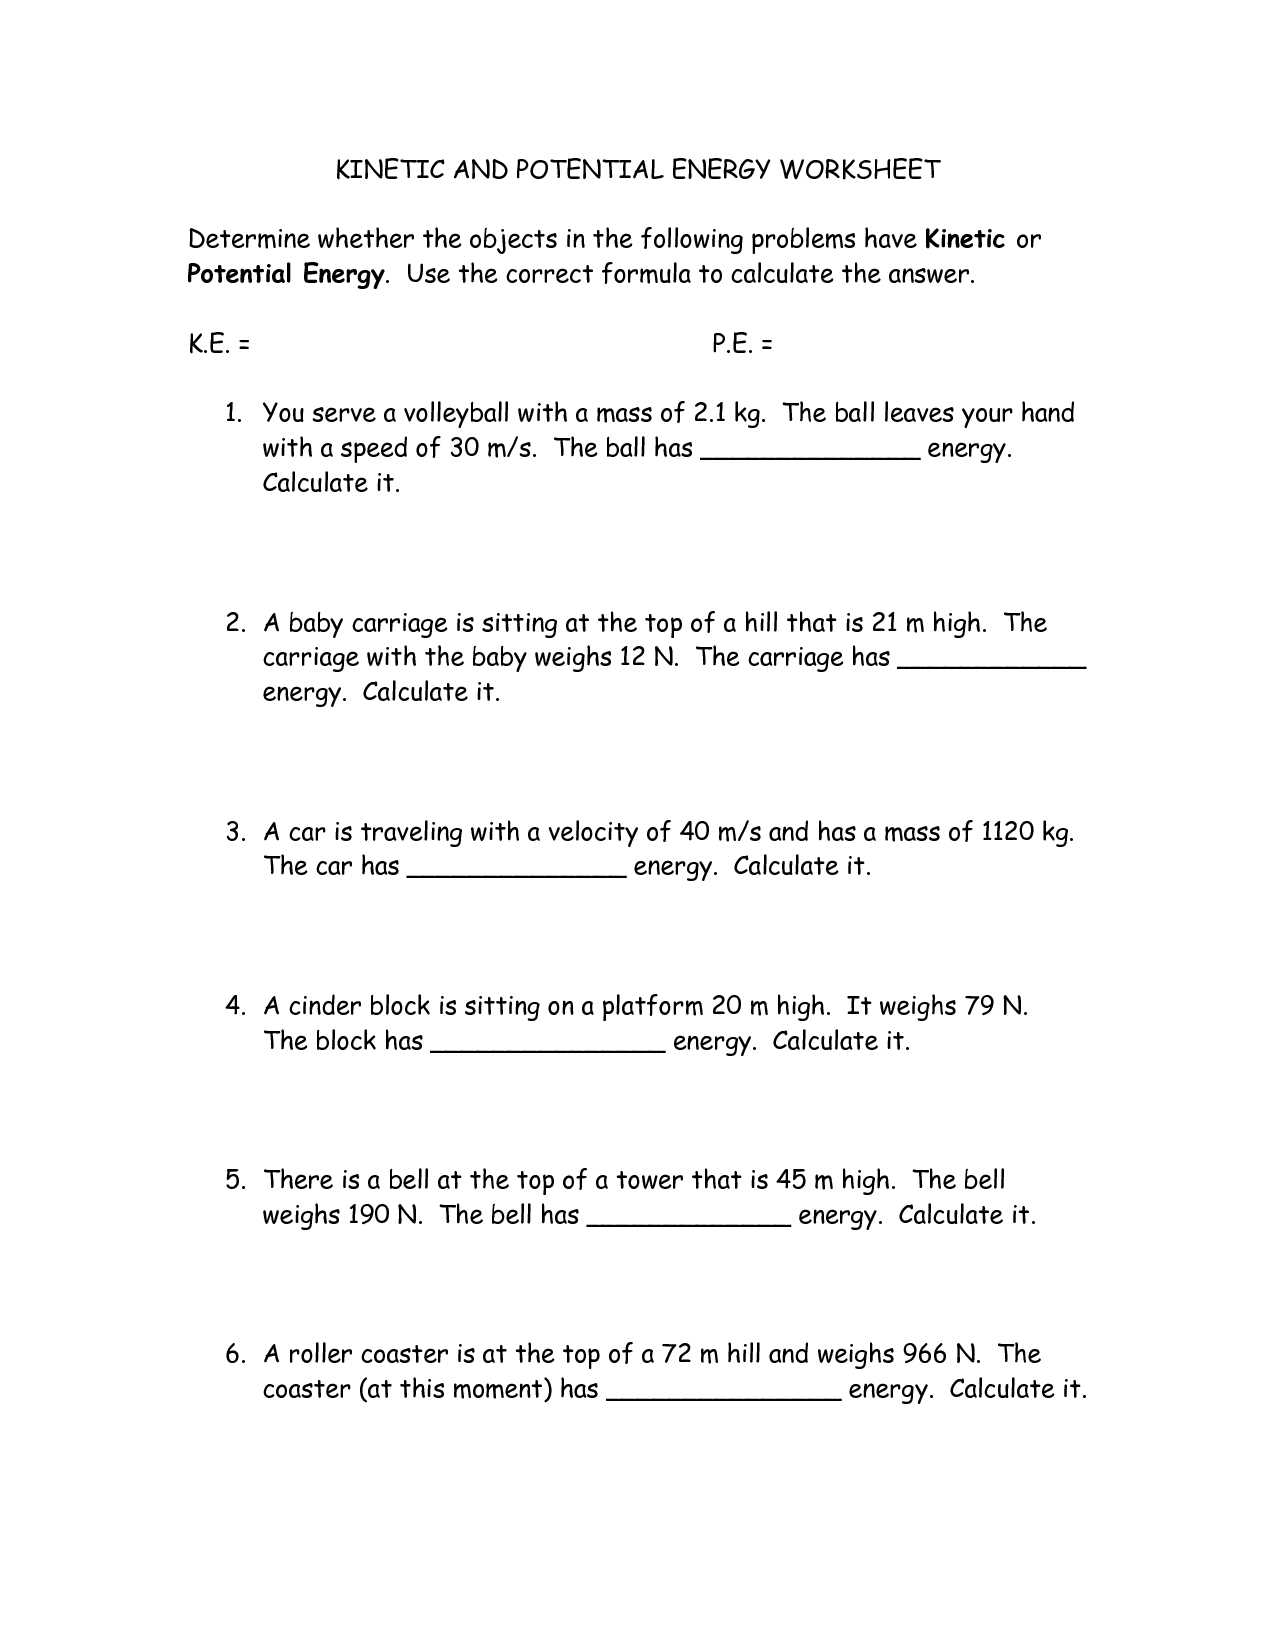 Potential Energy Problems Worksheet with Kinetic Energy Worksheet Image Collections Worksheet Math for Kids